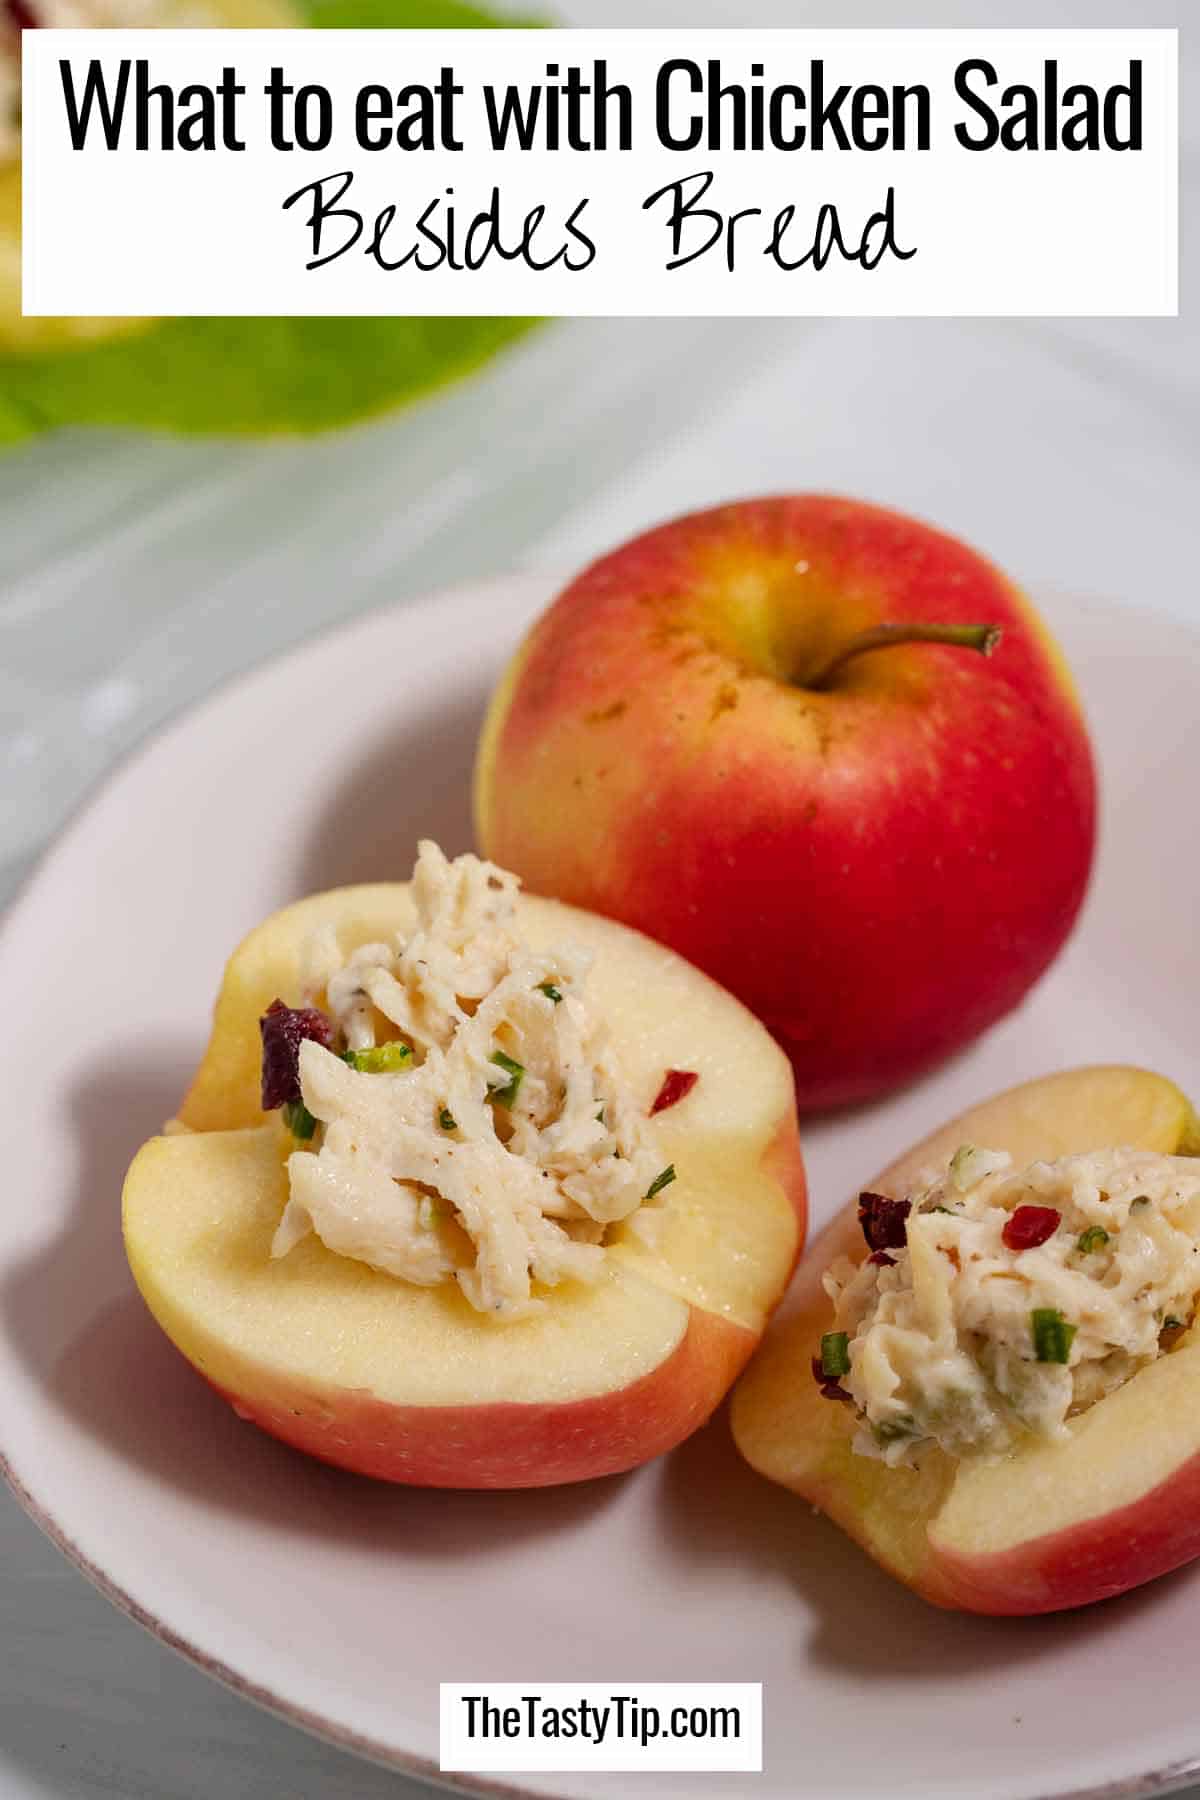 What to eat with chicken salad instead of bread pin with chicken salad stuffed apples on a plate.